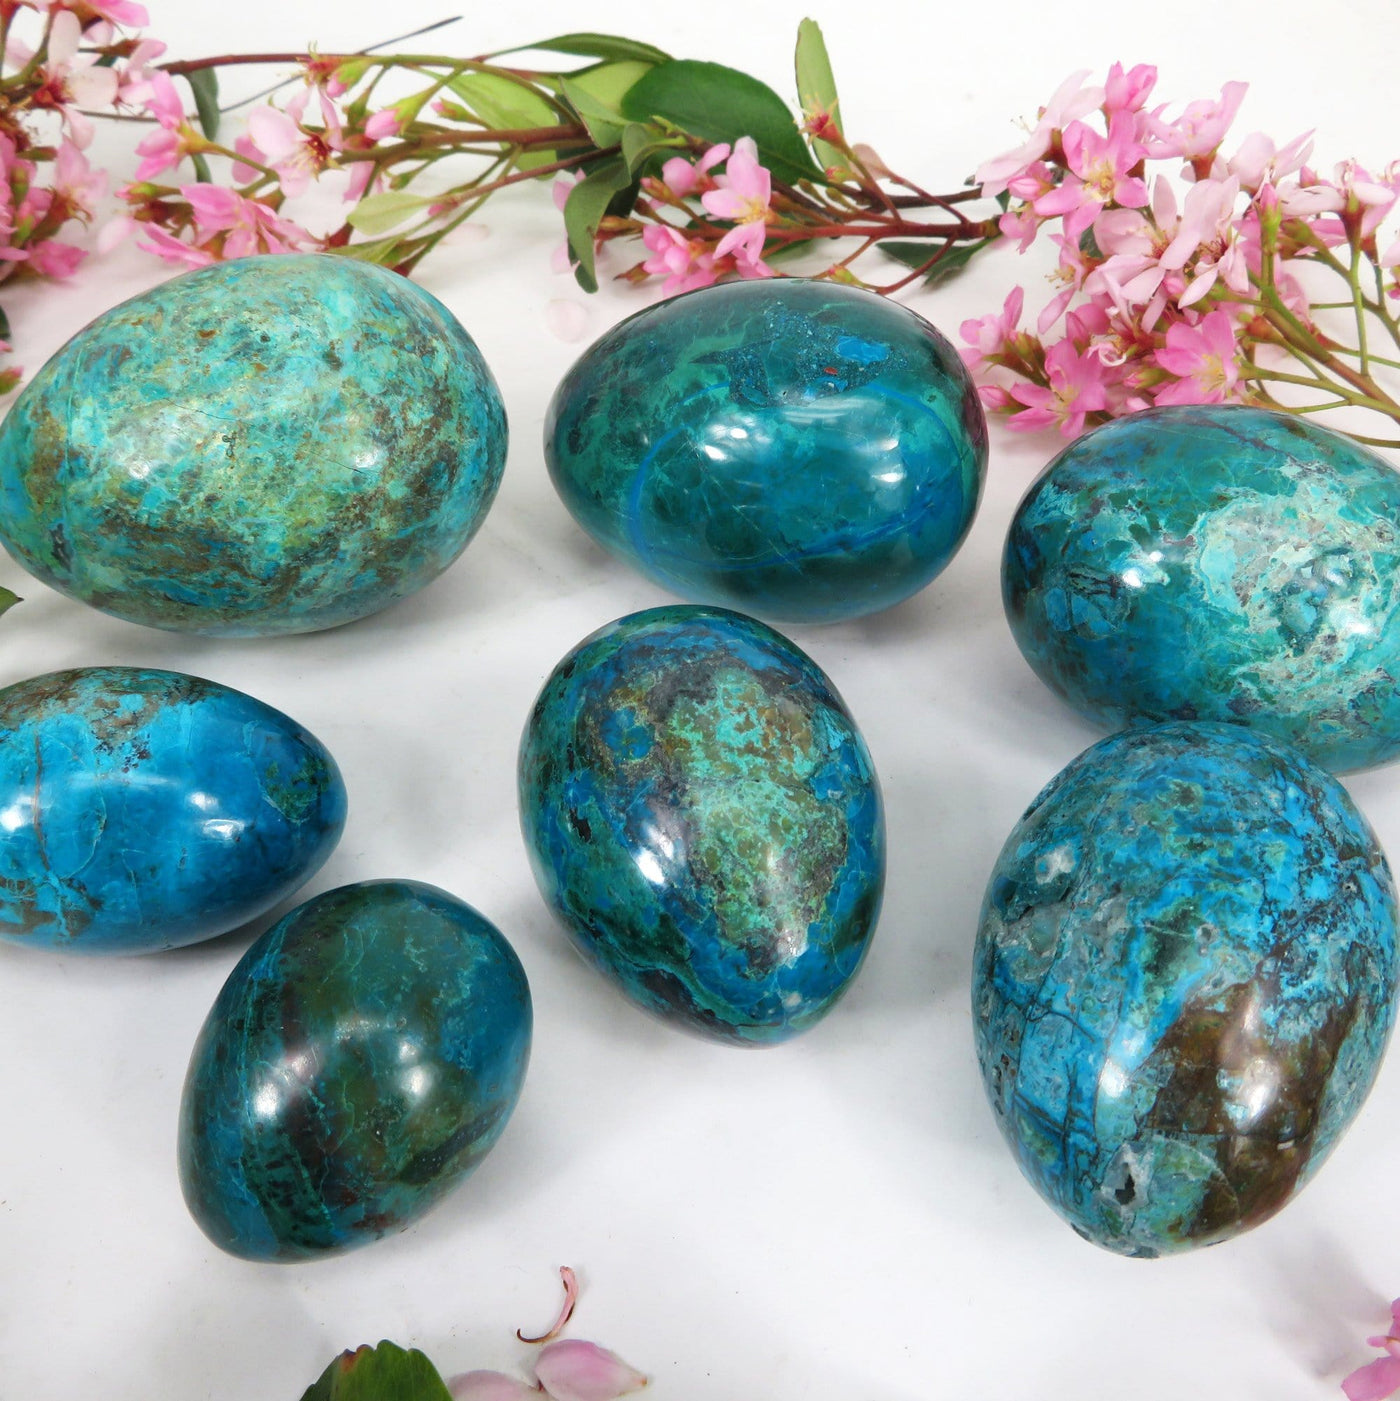 Eight Chrysocolla Polished Stone Eggs to show the differences in size, shape and color. 